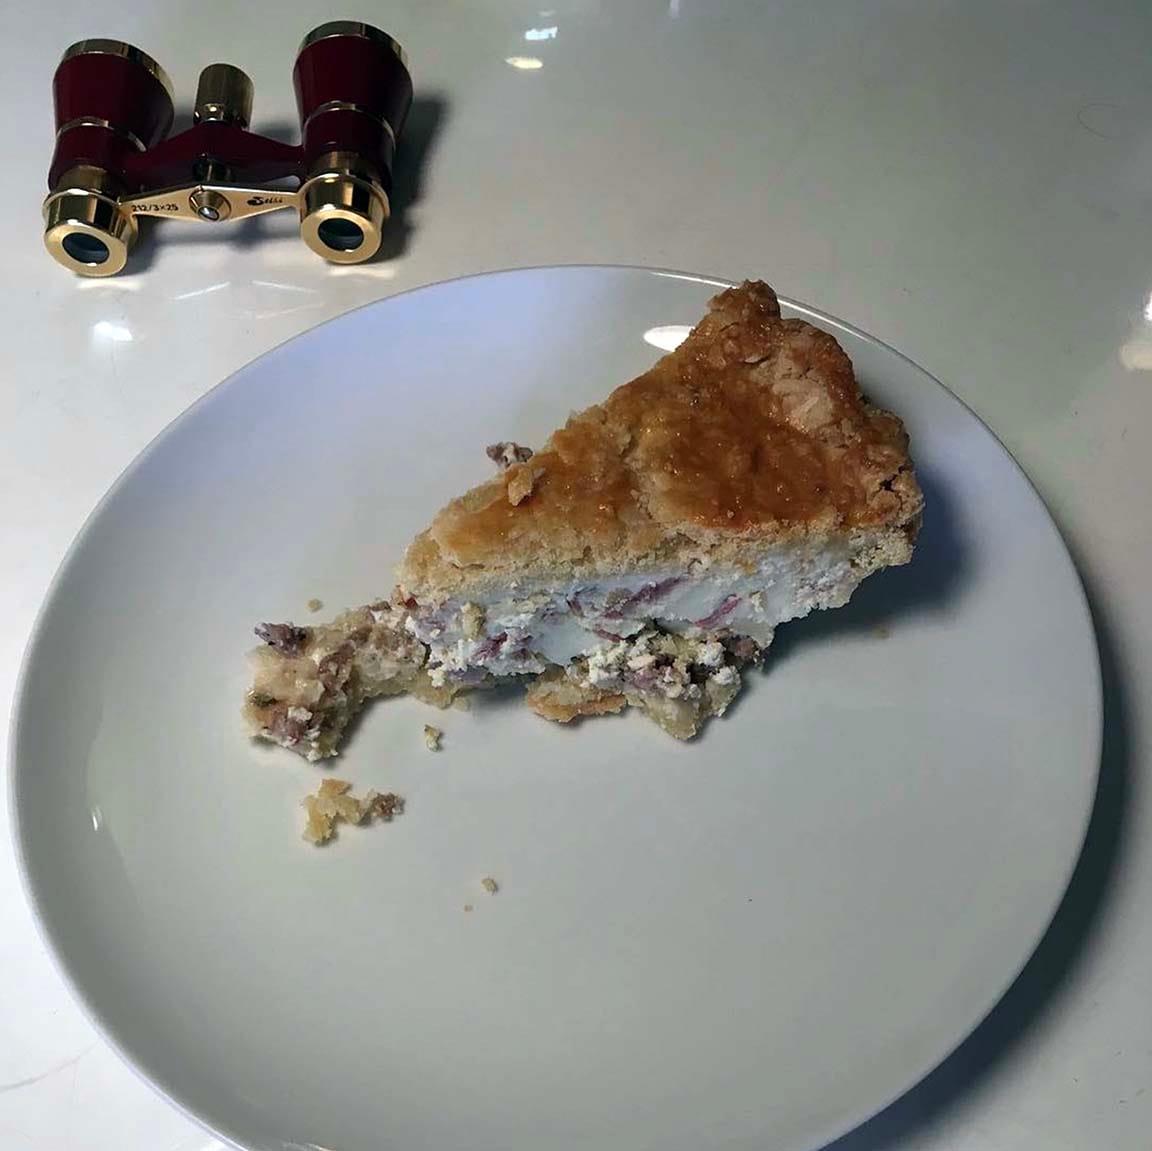 A slice of Easter pie, golden on top and white on the sides, with crumbled sausage coming out at the bottom, sits on a white plate on a white table. Next to it, for some reason I can't remember, is a pair of opera glasses with a dark red body and gold-toned fittings.